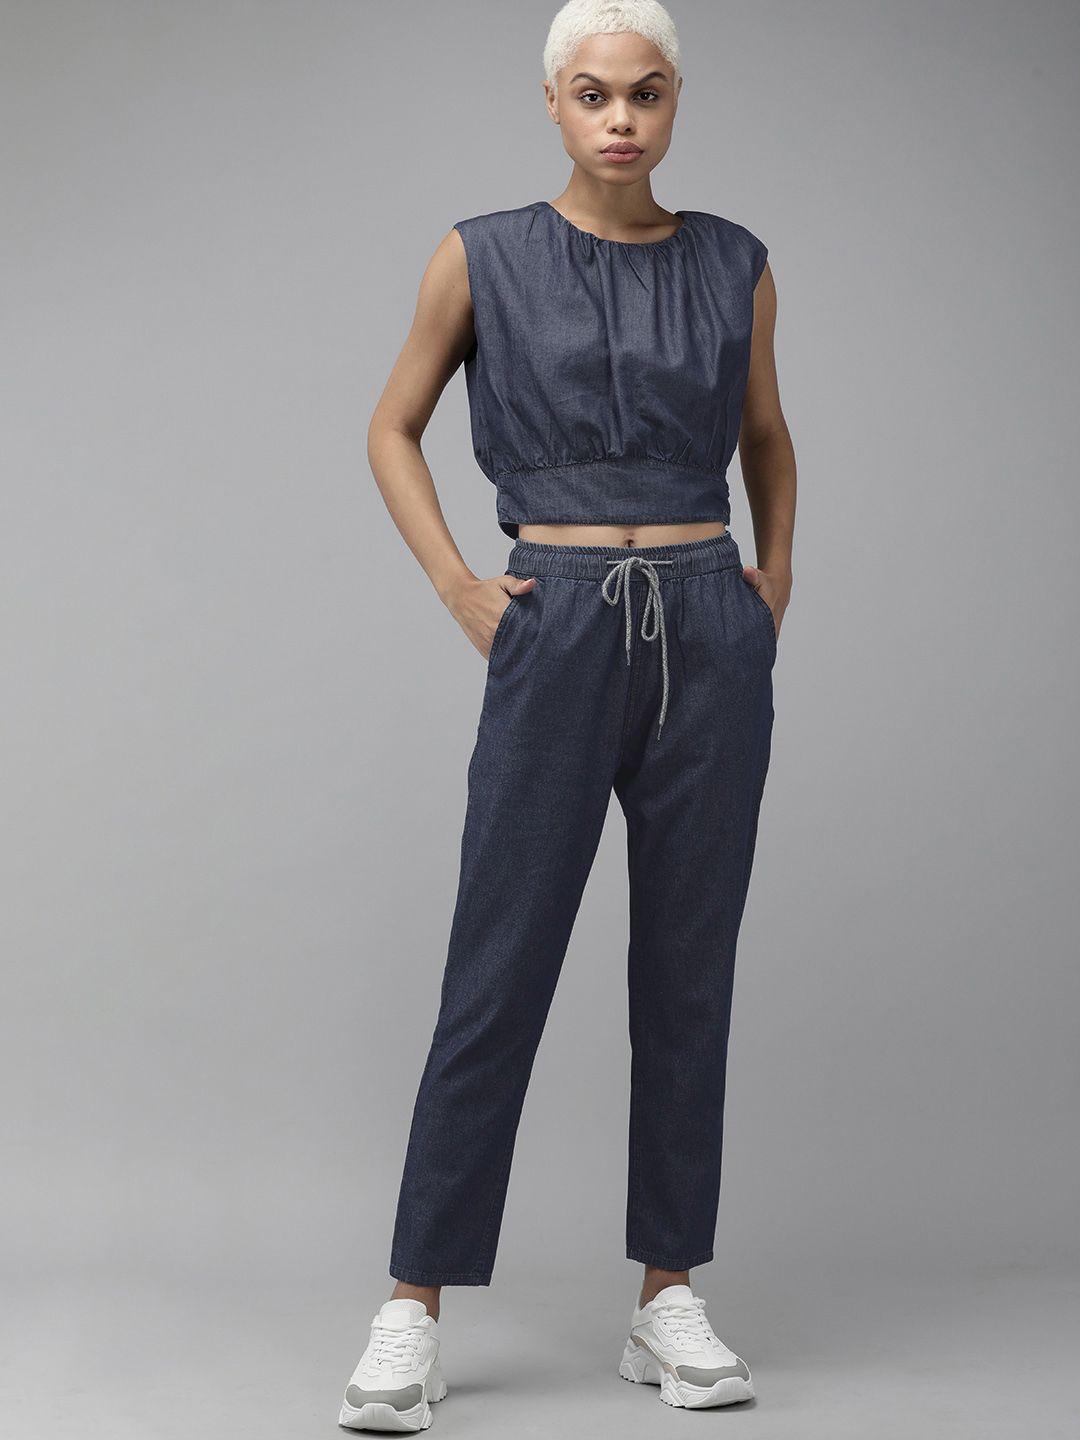 the roadster lifestyle co women navy blue solid denim co-ord set